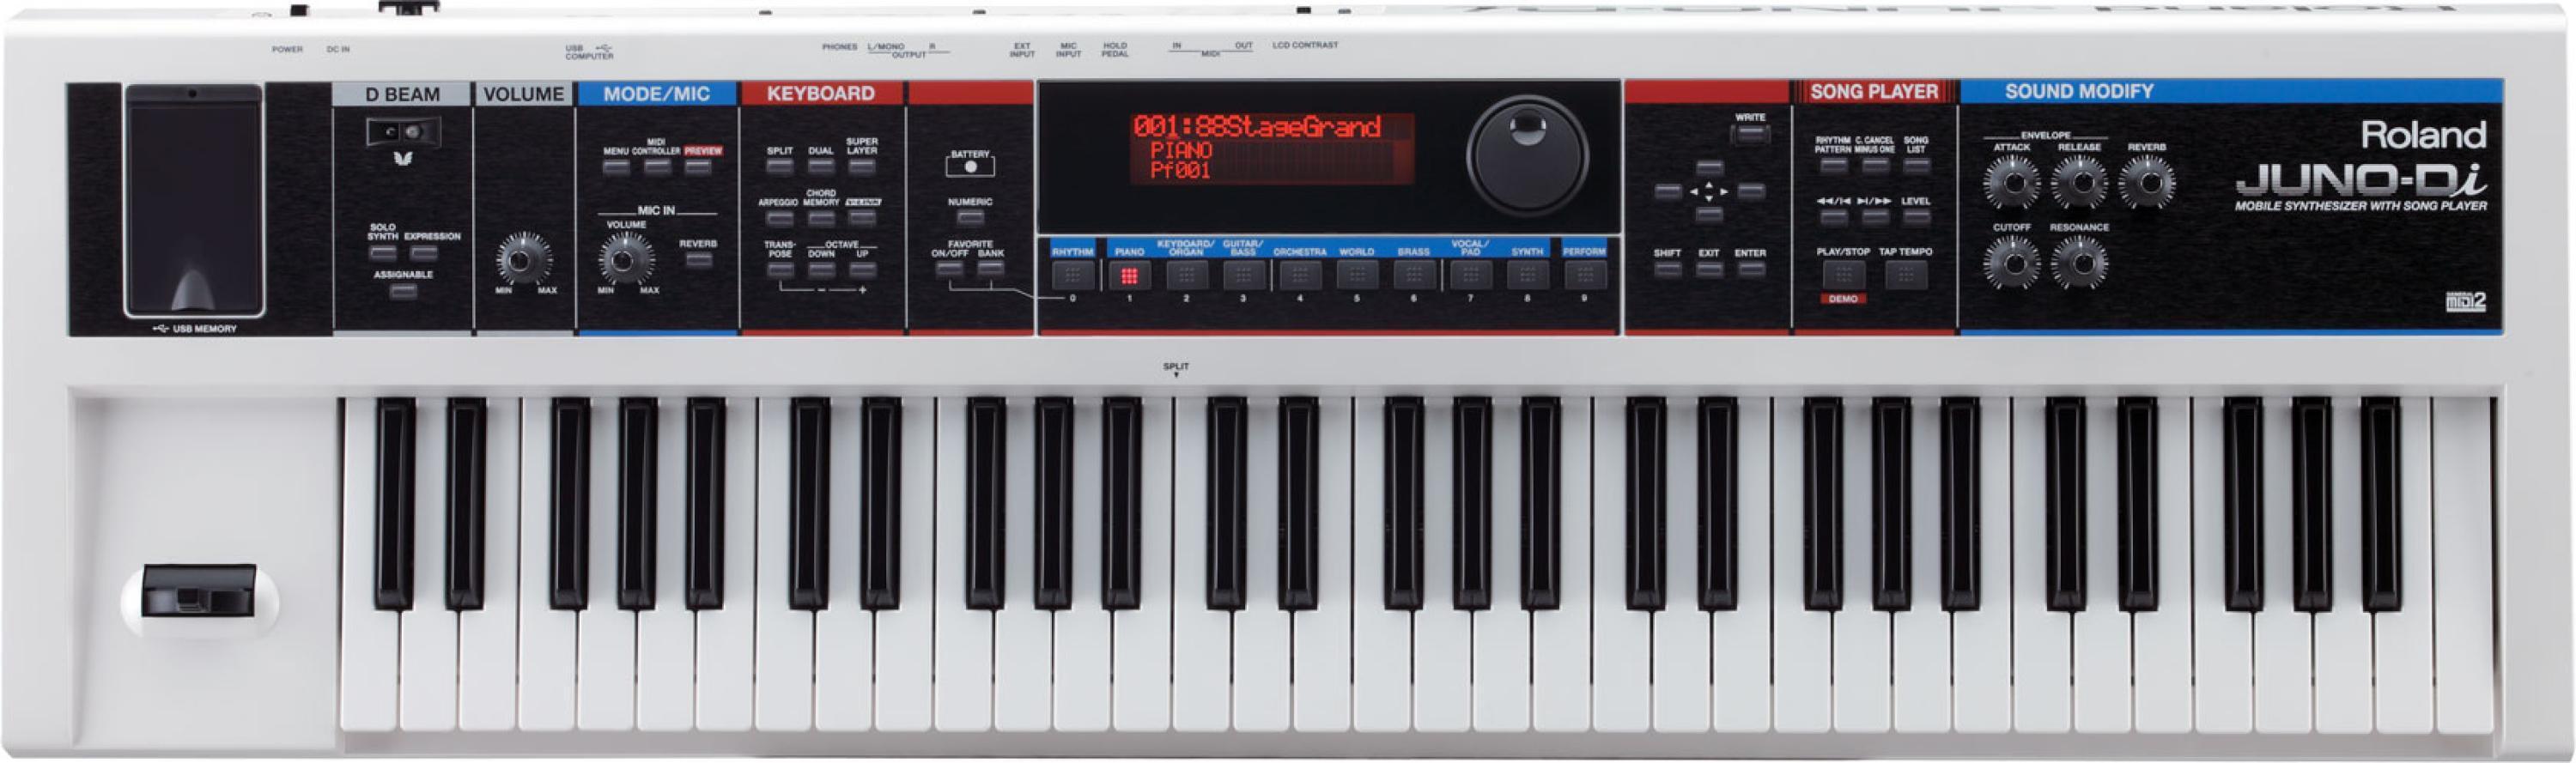 Roland JUNO-Di 61-Key Synthesizer - White | Sweetwater